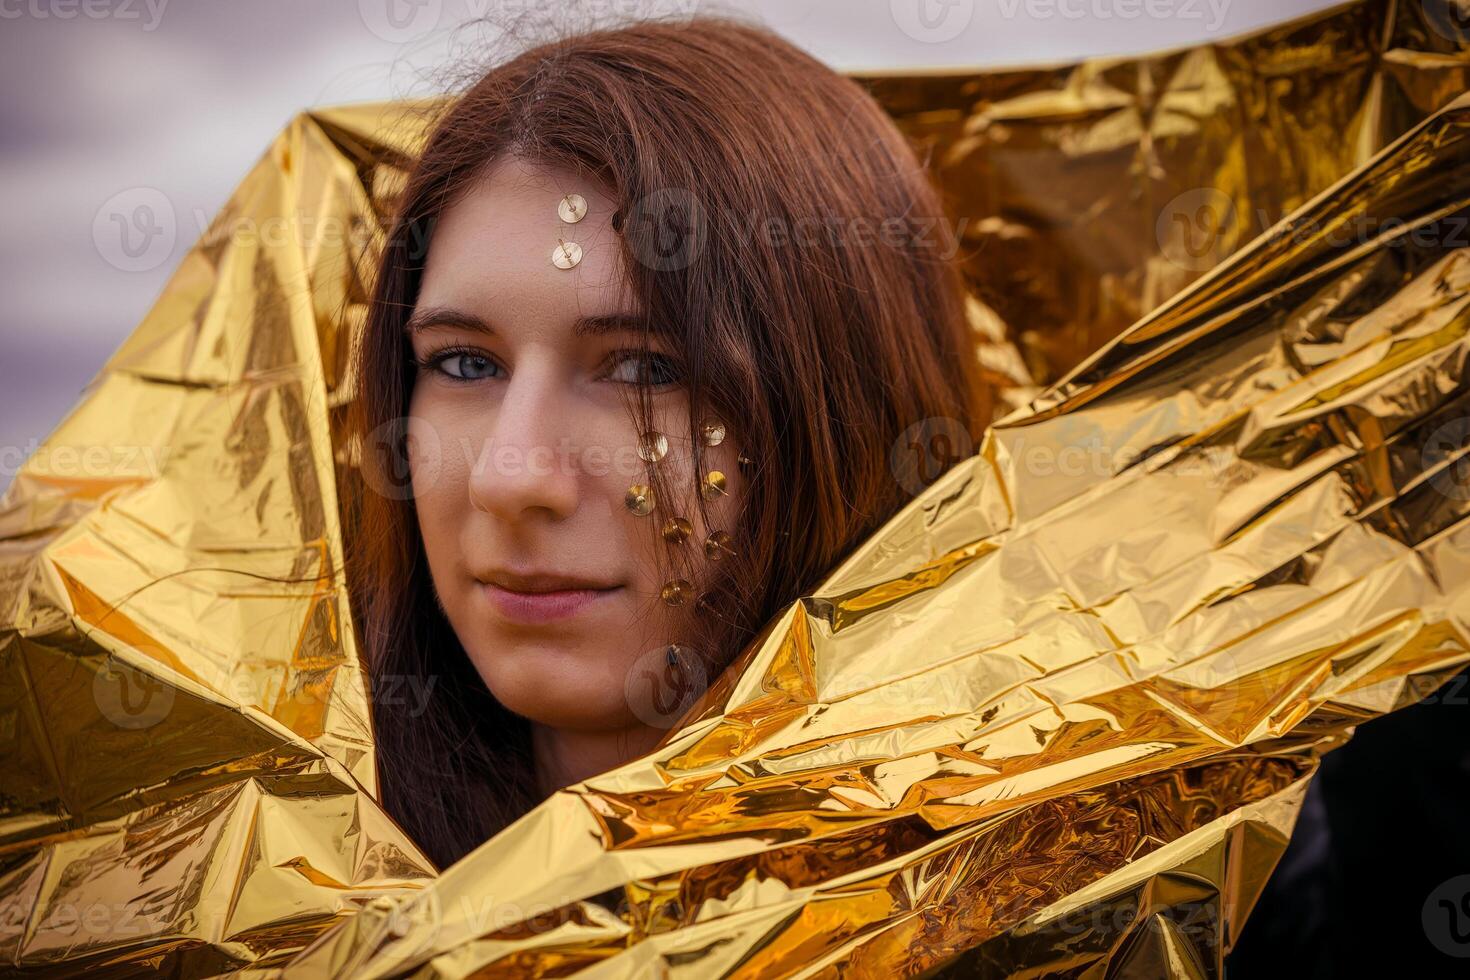 woman as a fantasy representation with tacks in her face and a golden rescue blanket photo